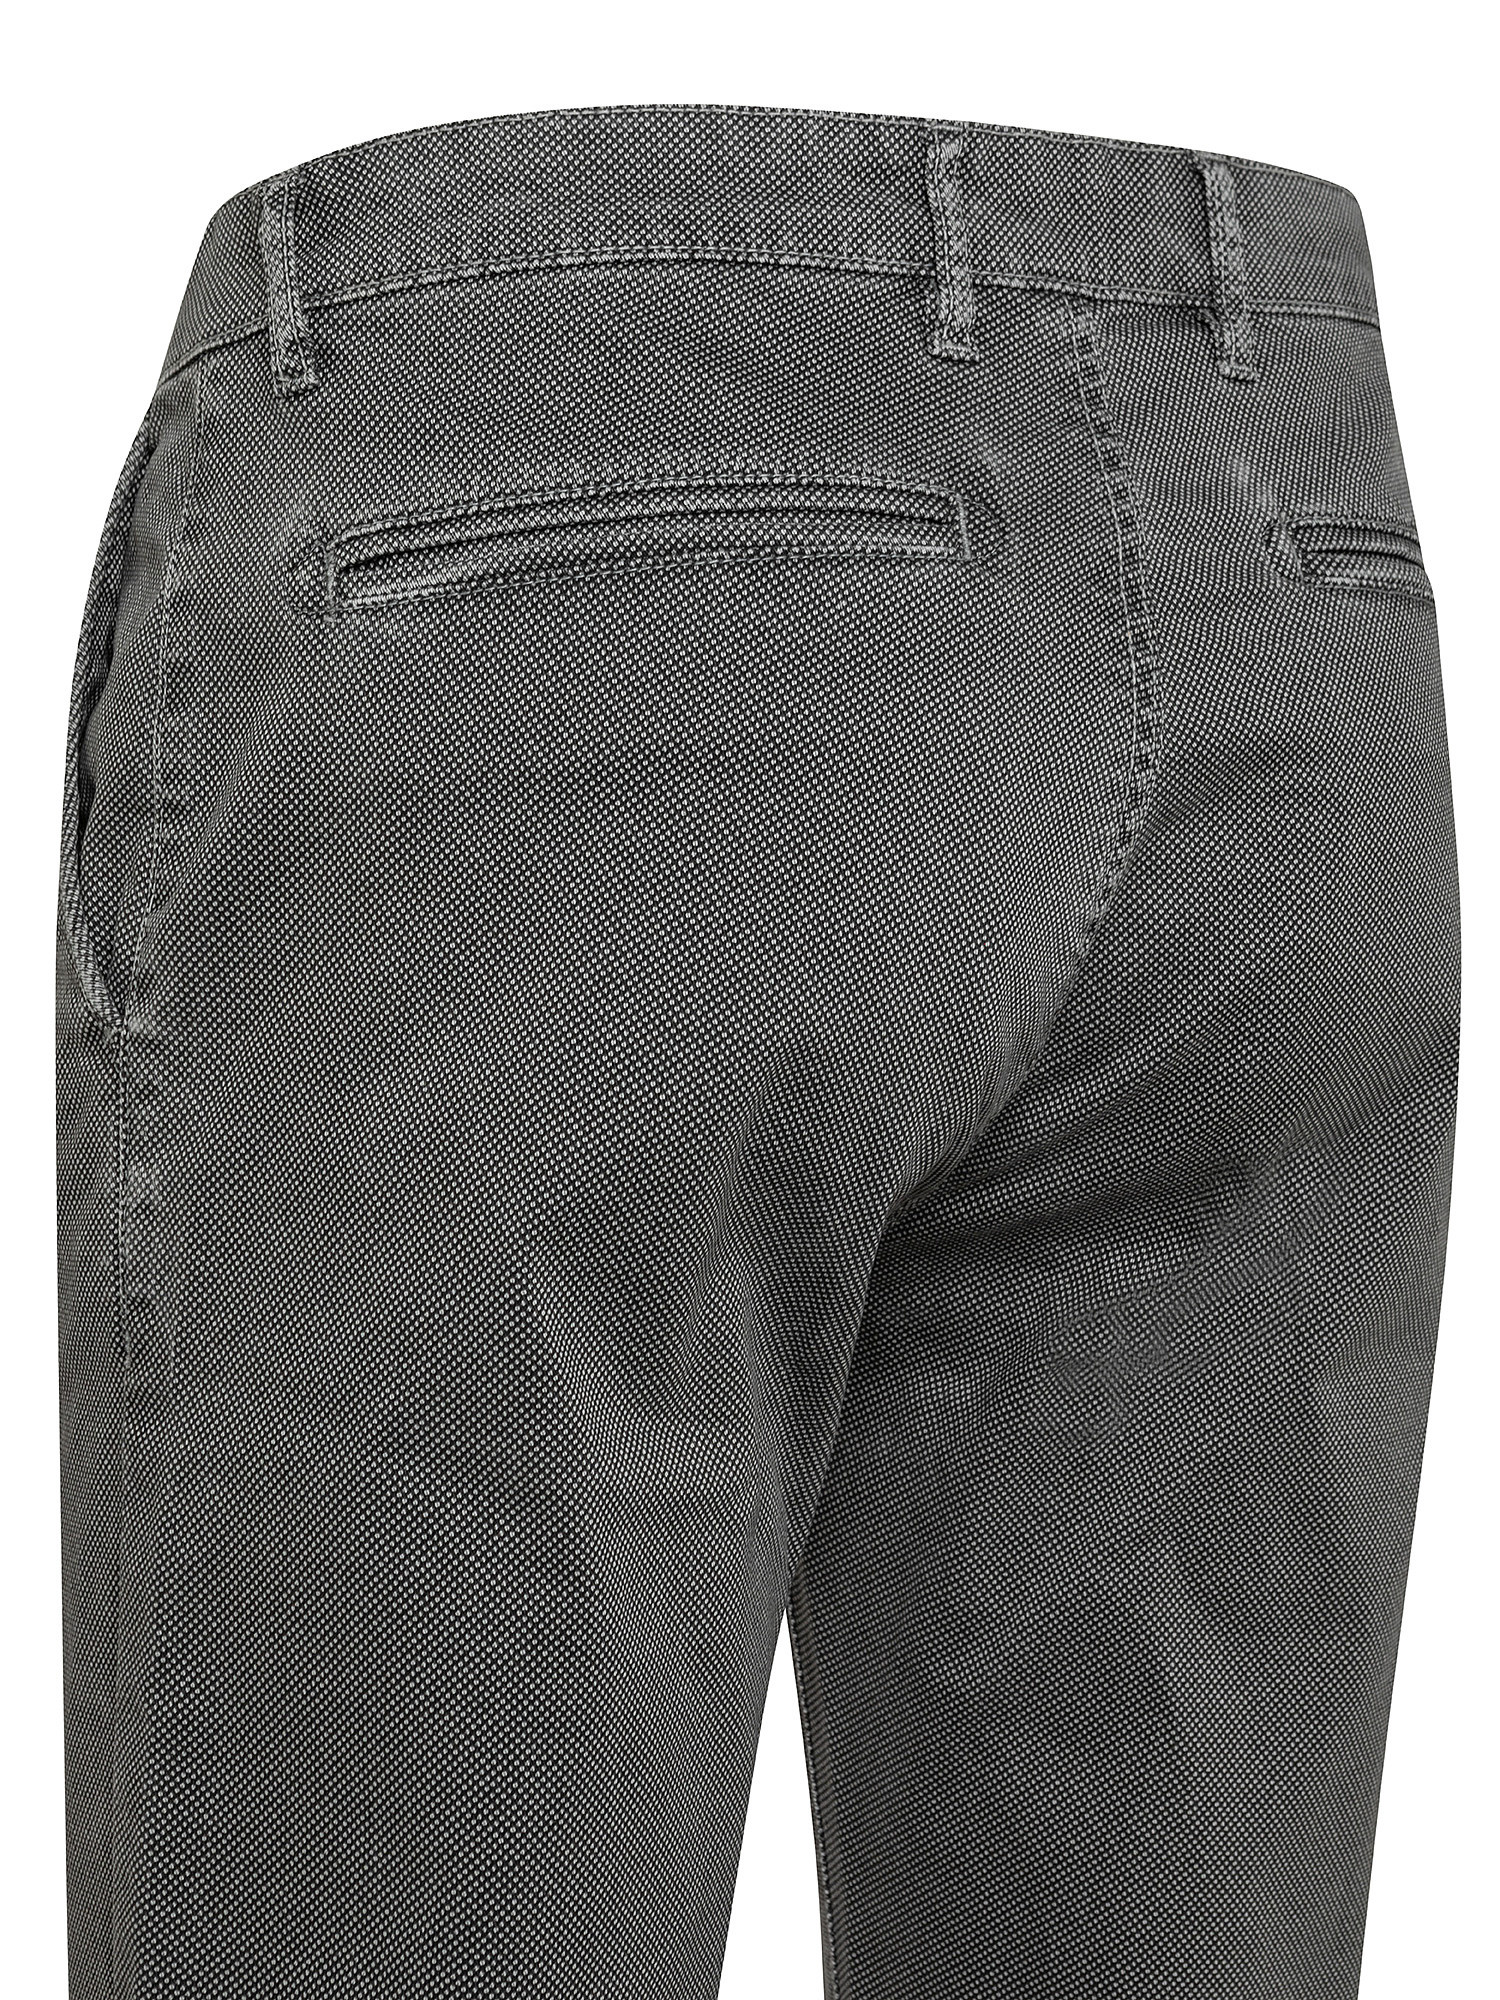 Pantalone chinos in cotone stretch, Grigio, large image number 2